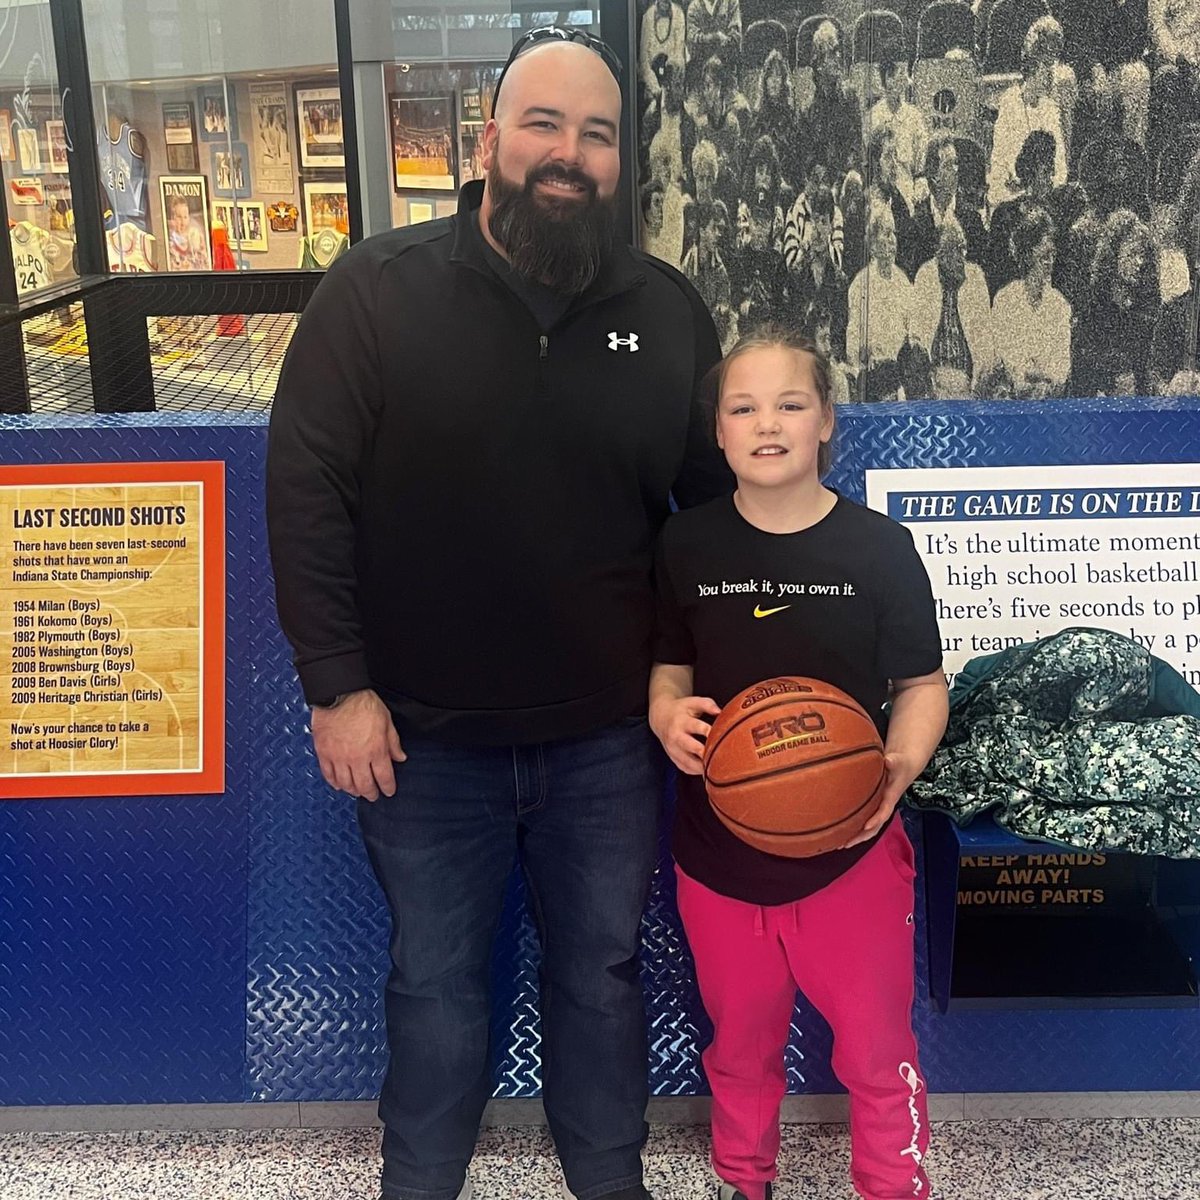 In honor of the Women's Final 4 games tonight, we thought we would share these awesome visitors who came to the @HoopsHall back in February! Ben and his daughter, Kenzie came from Ohio to see Caitlin Clark play against @IndianaWBB! #WFinalFour | #henrycountyin |…